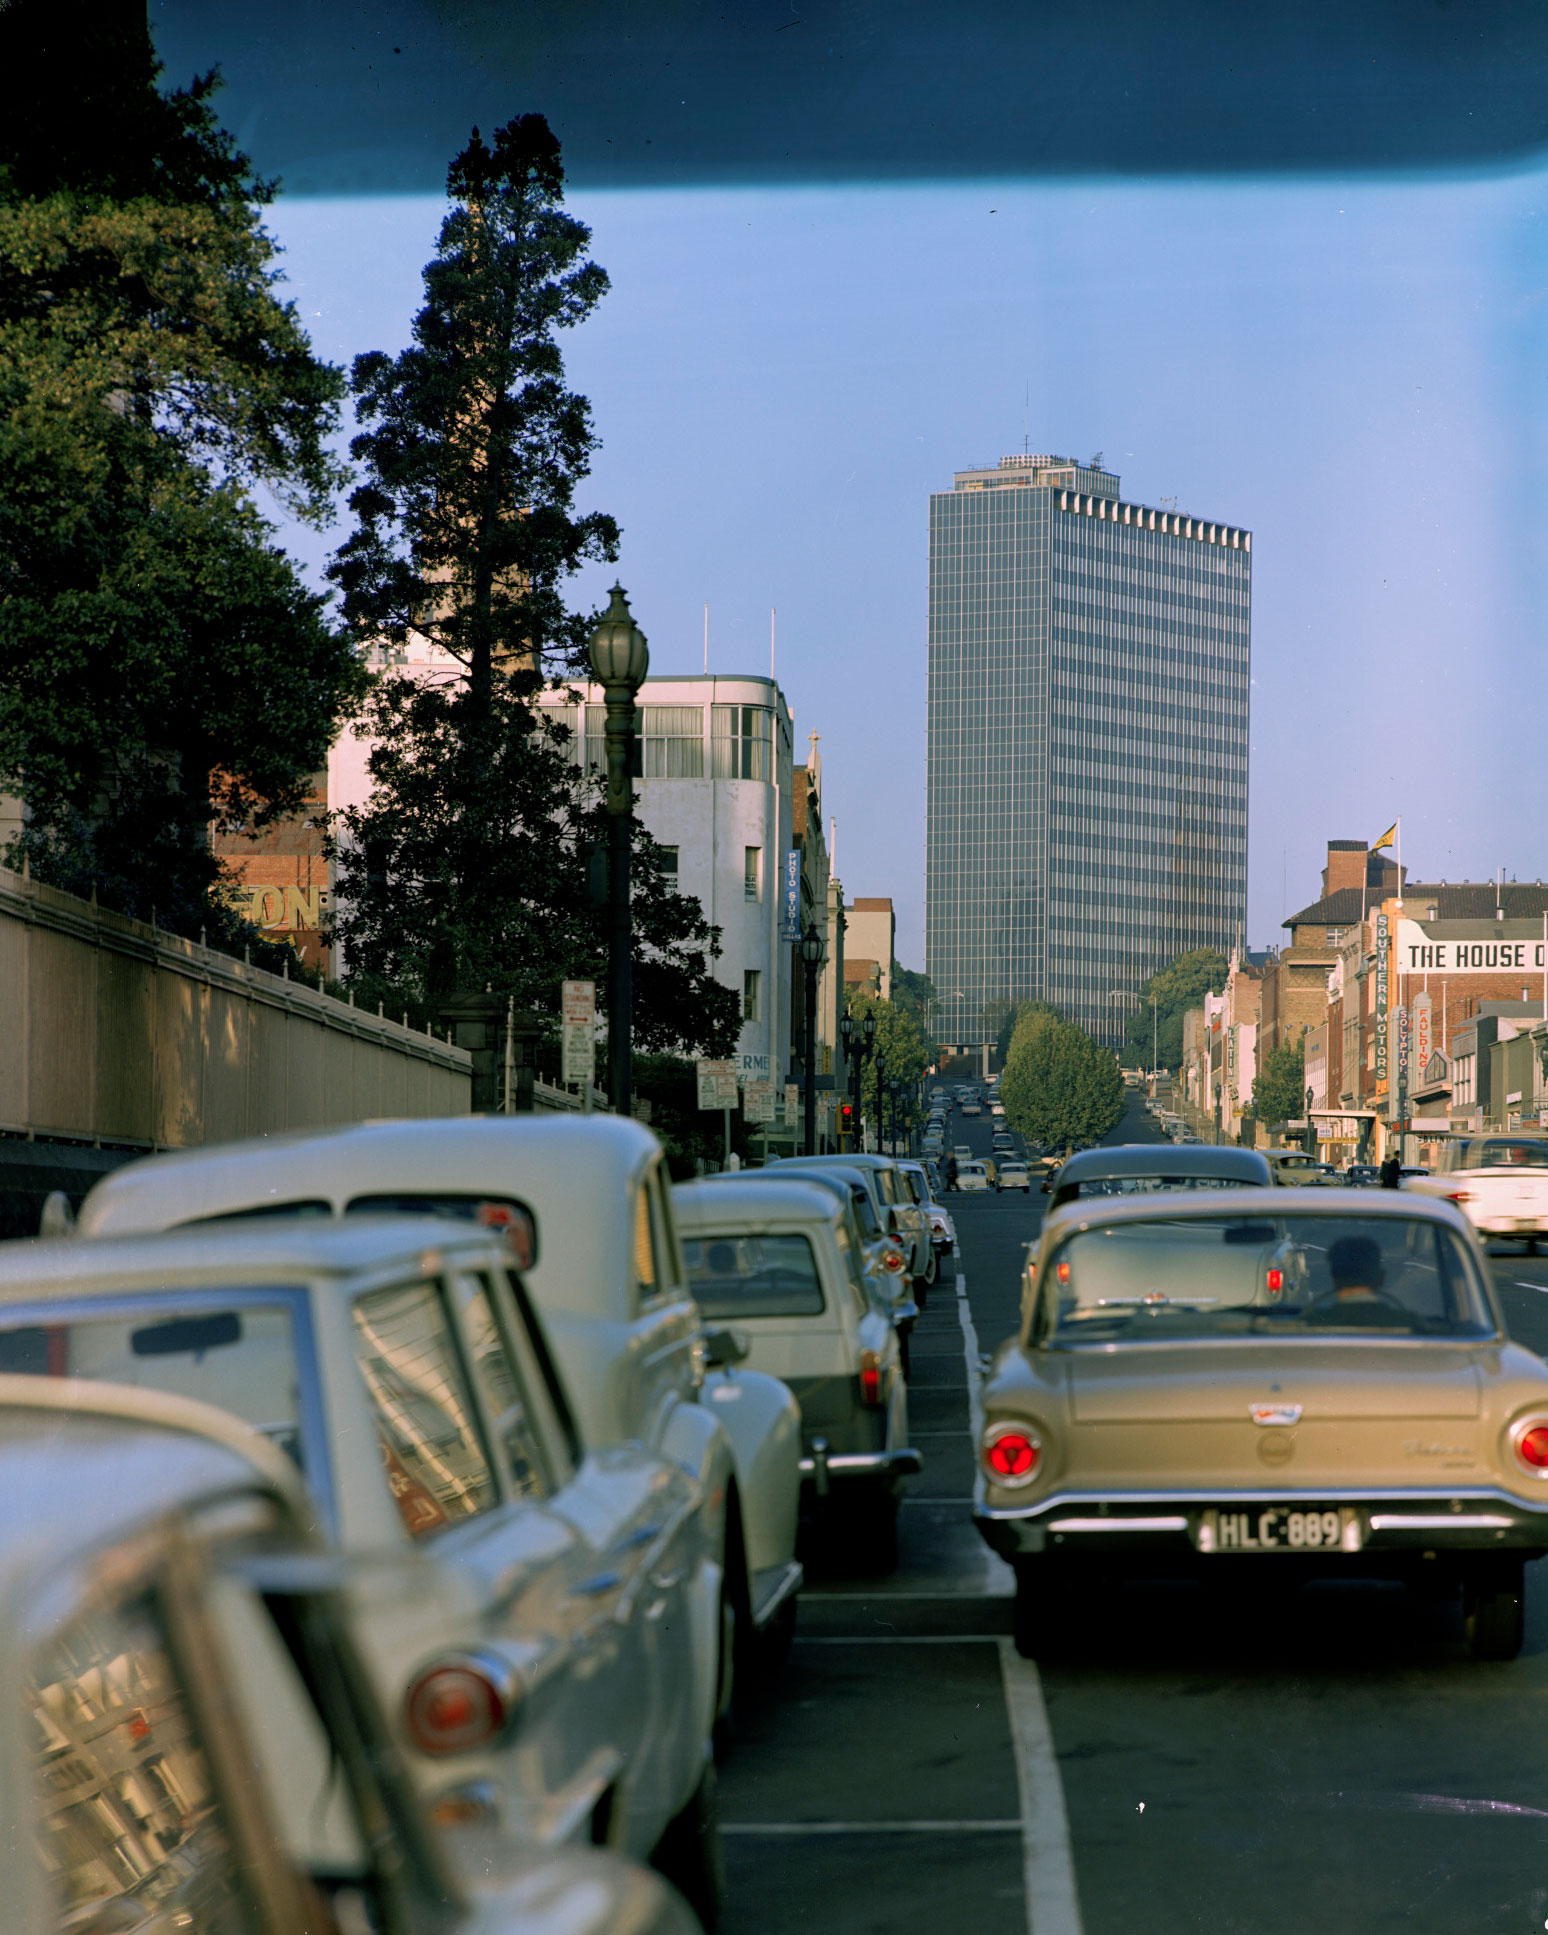 Lonsdale Street looking towards ICI House, Melbourne.